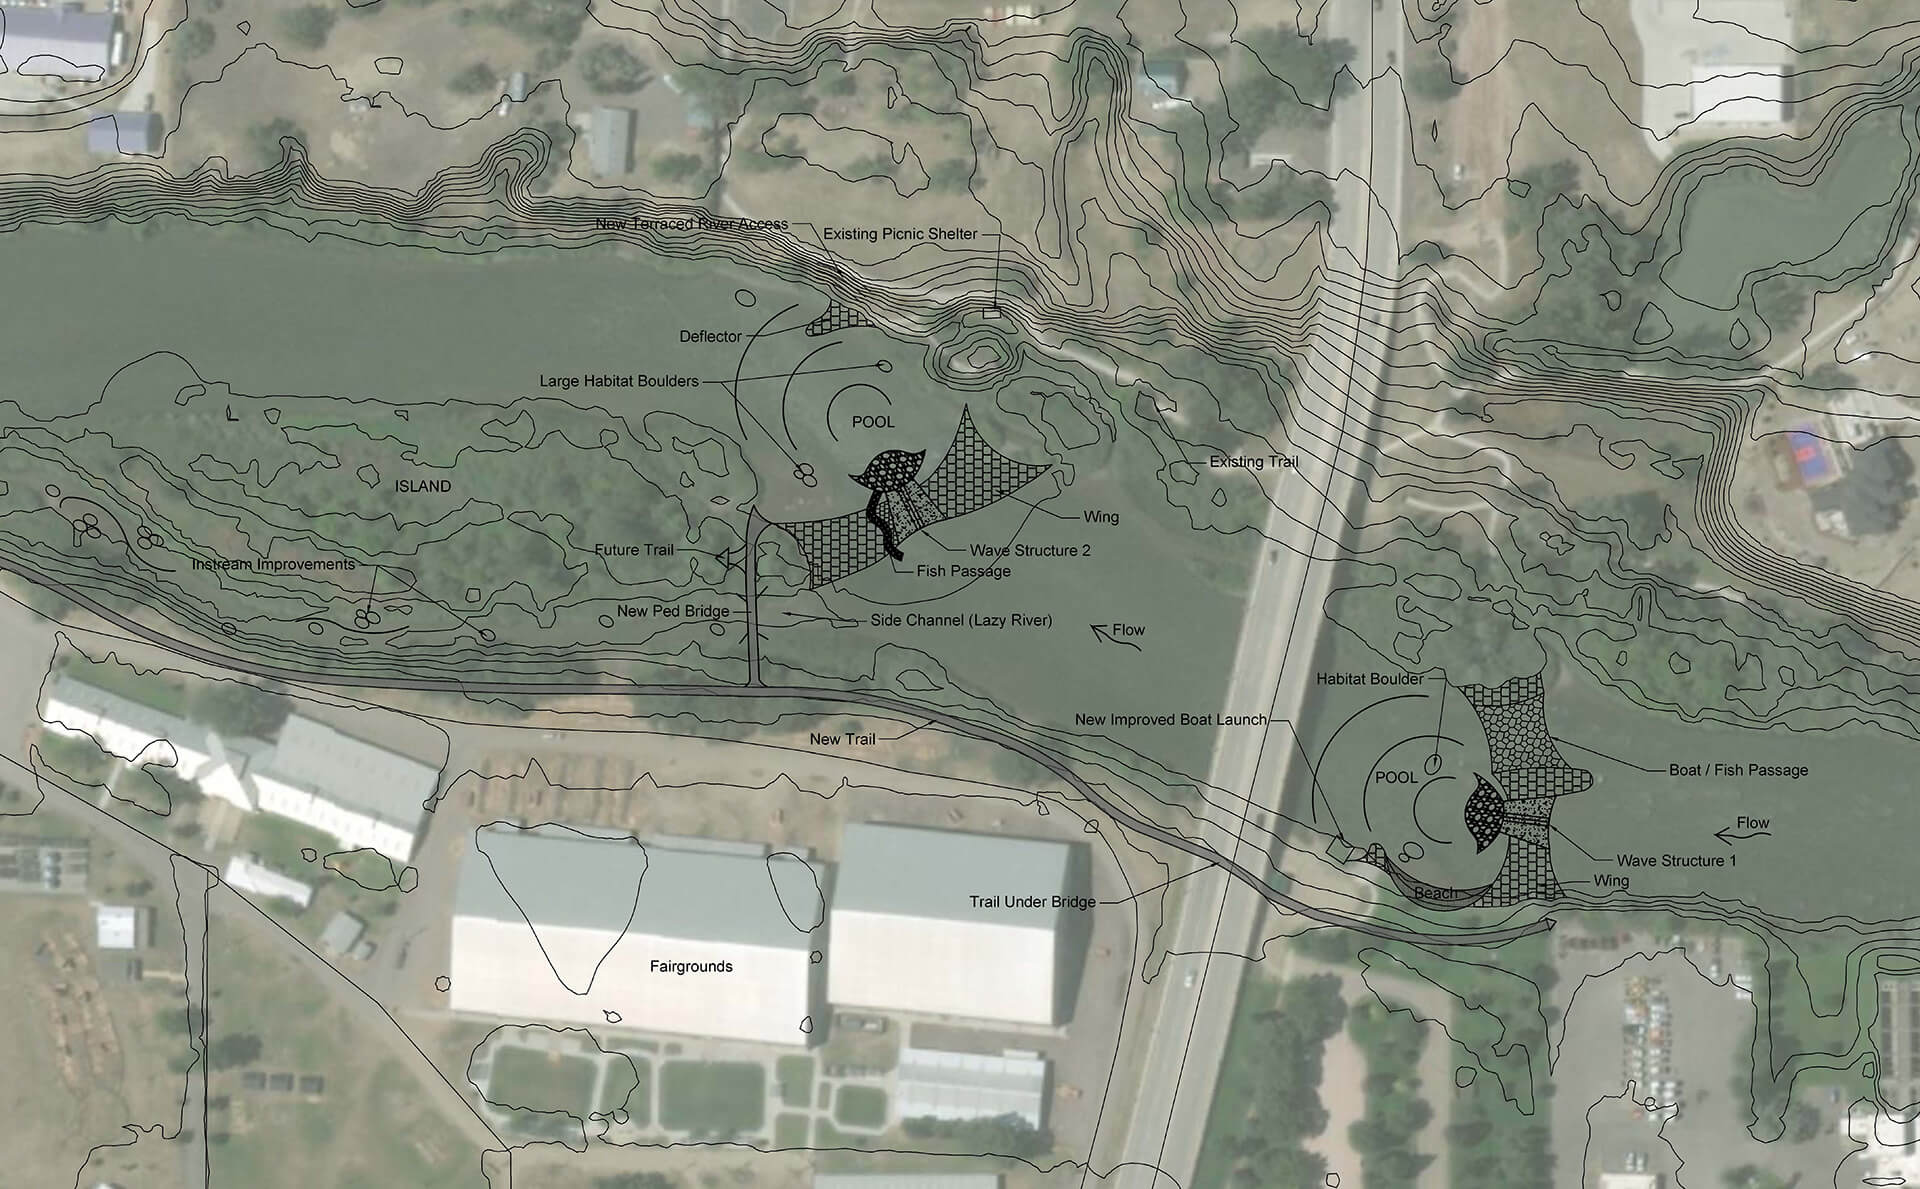 Sonoma_Pre-concept-whitewater-park-plan-illustrative-drawing